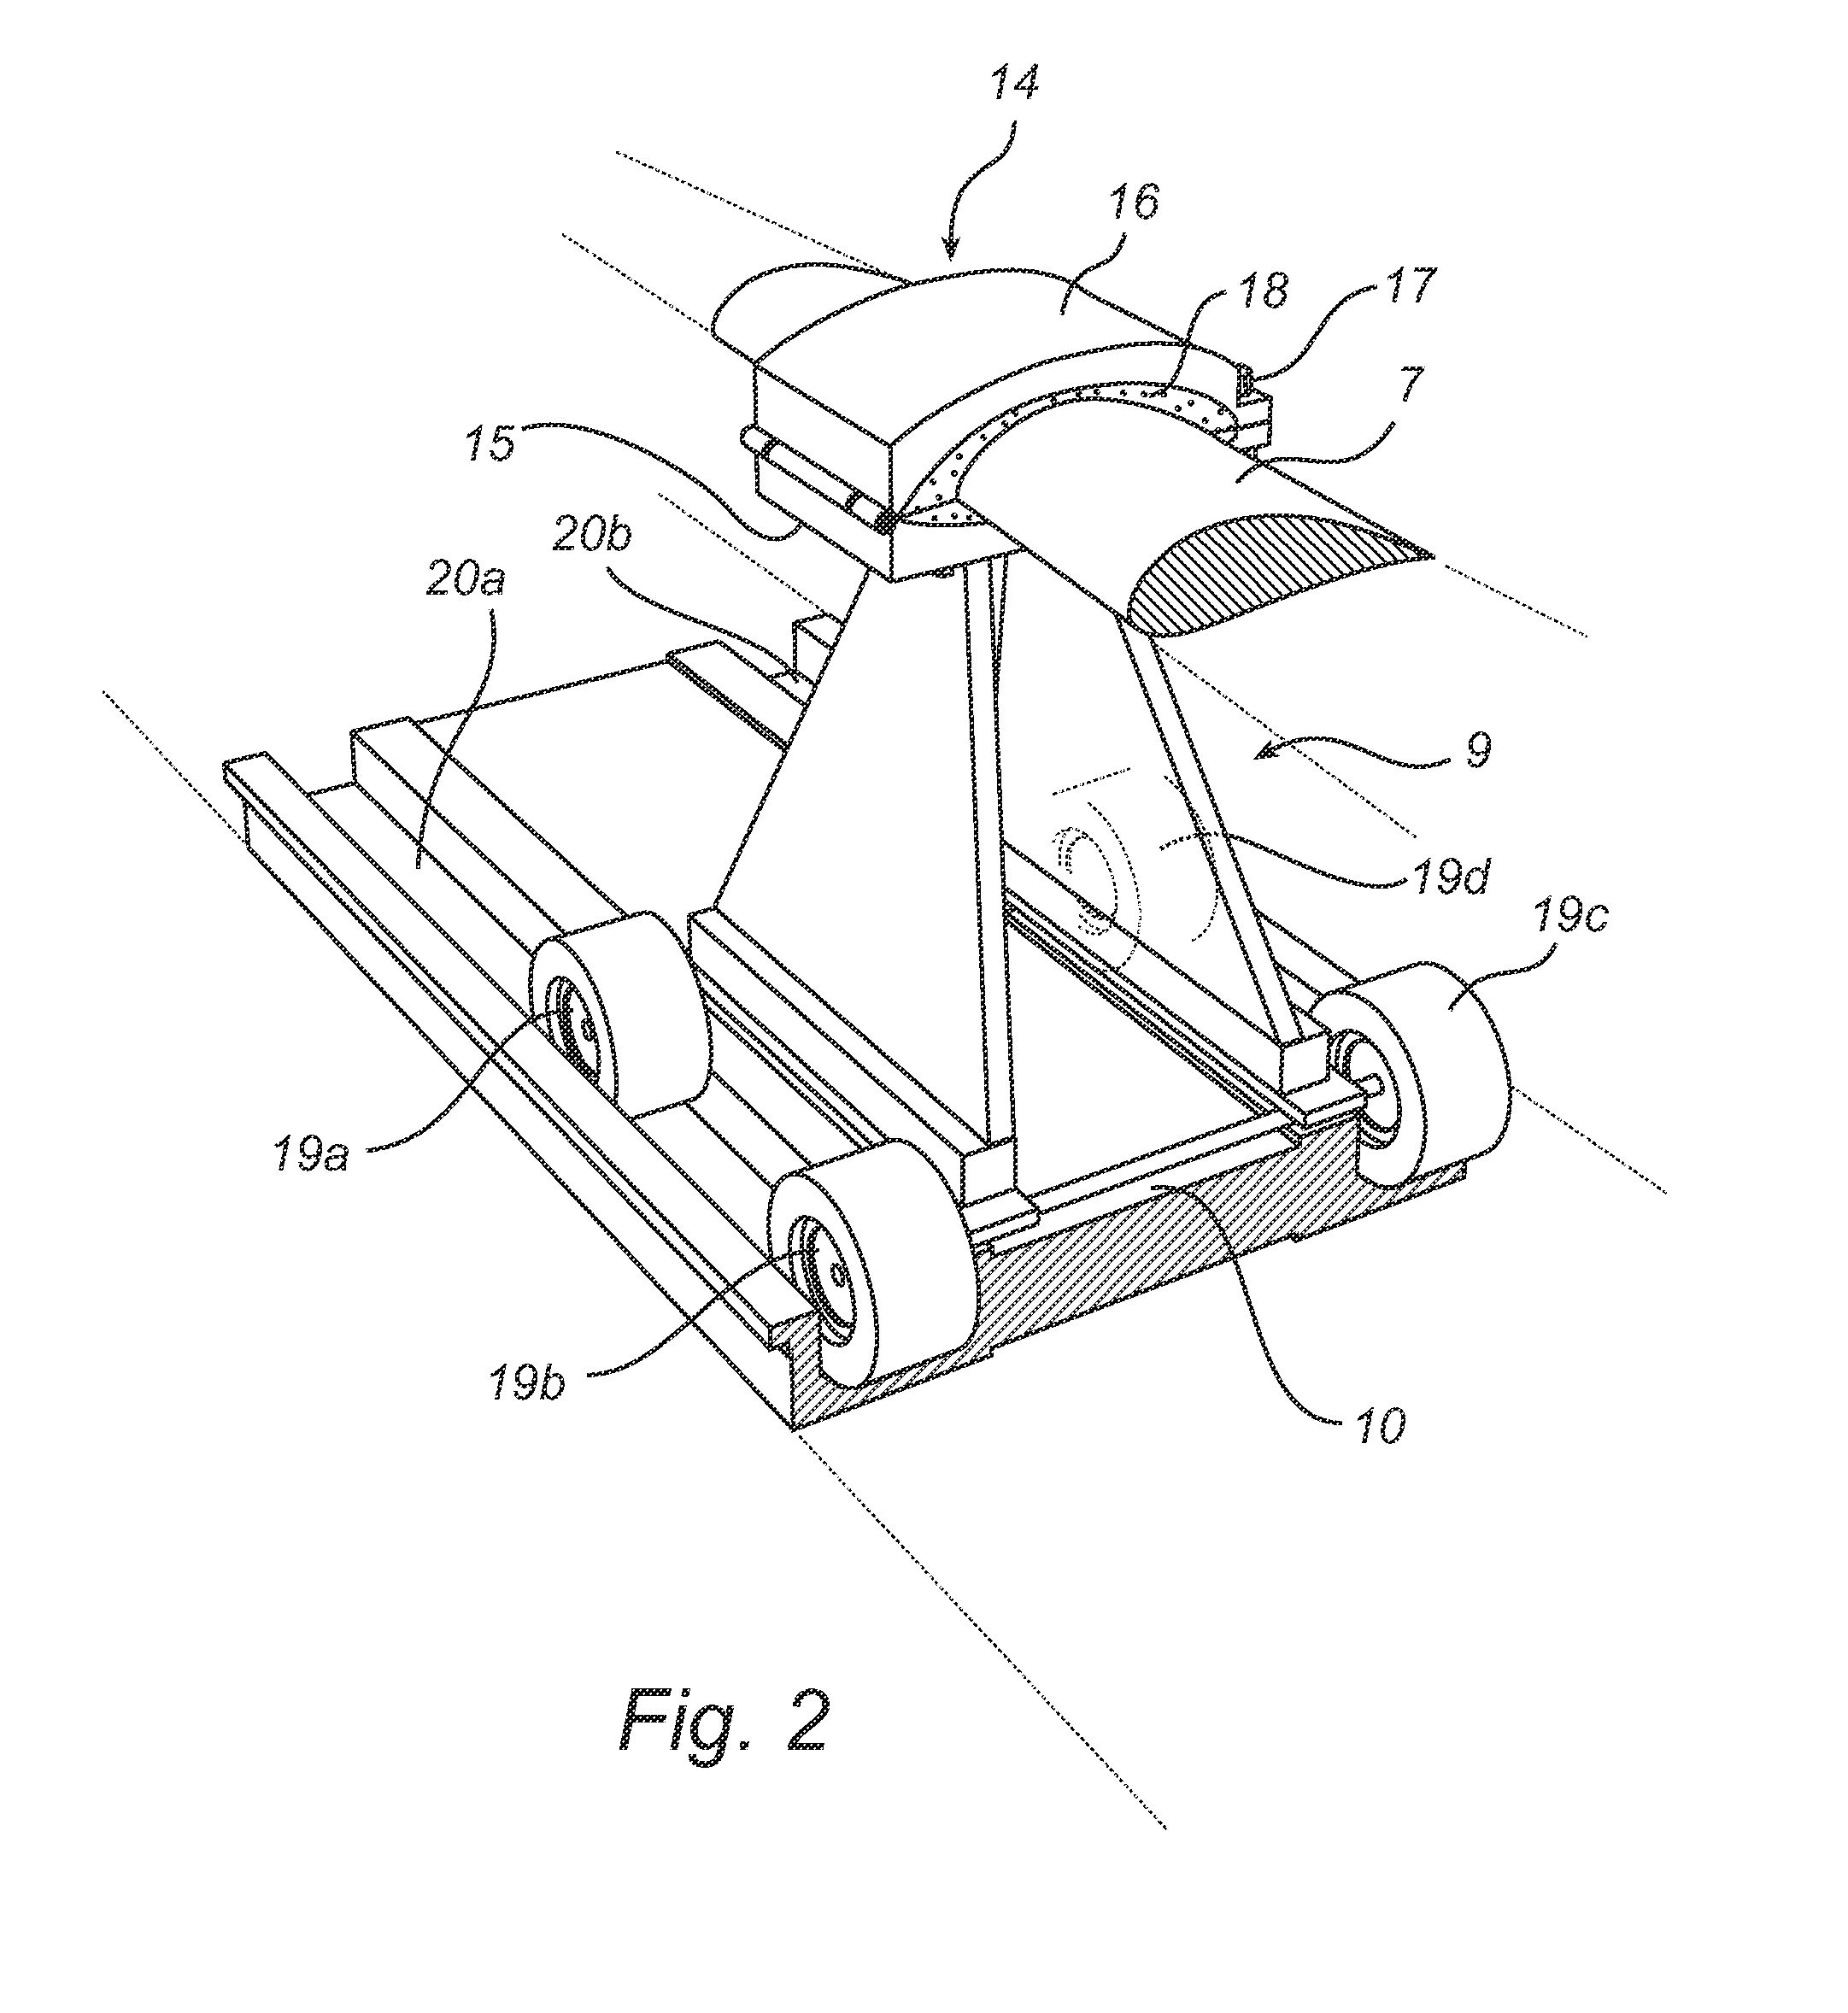 Telescopic vehicle and method for transporting a long object